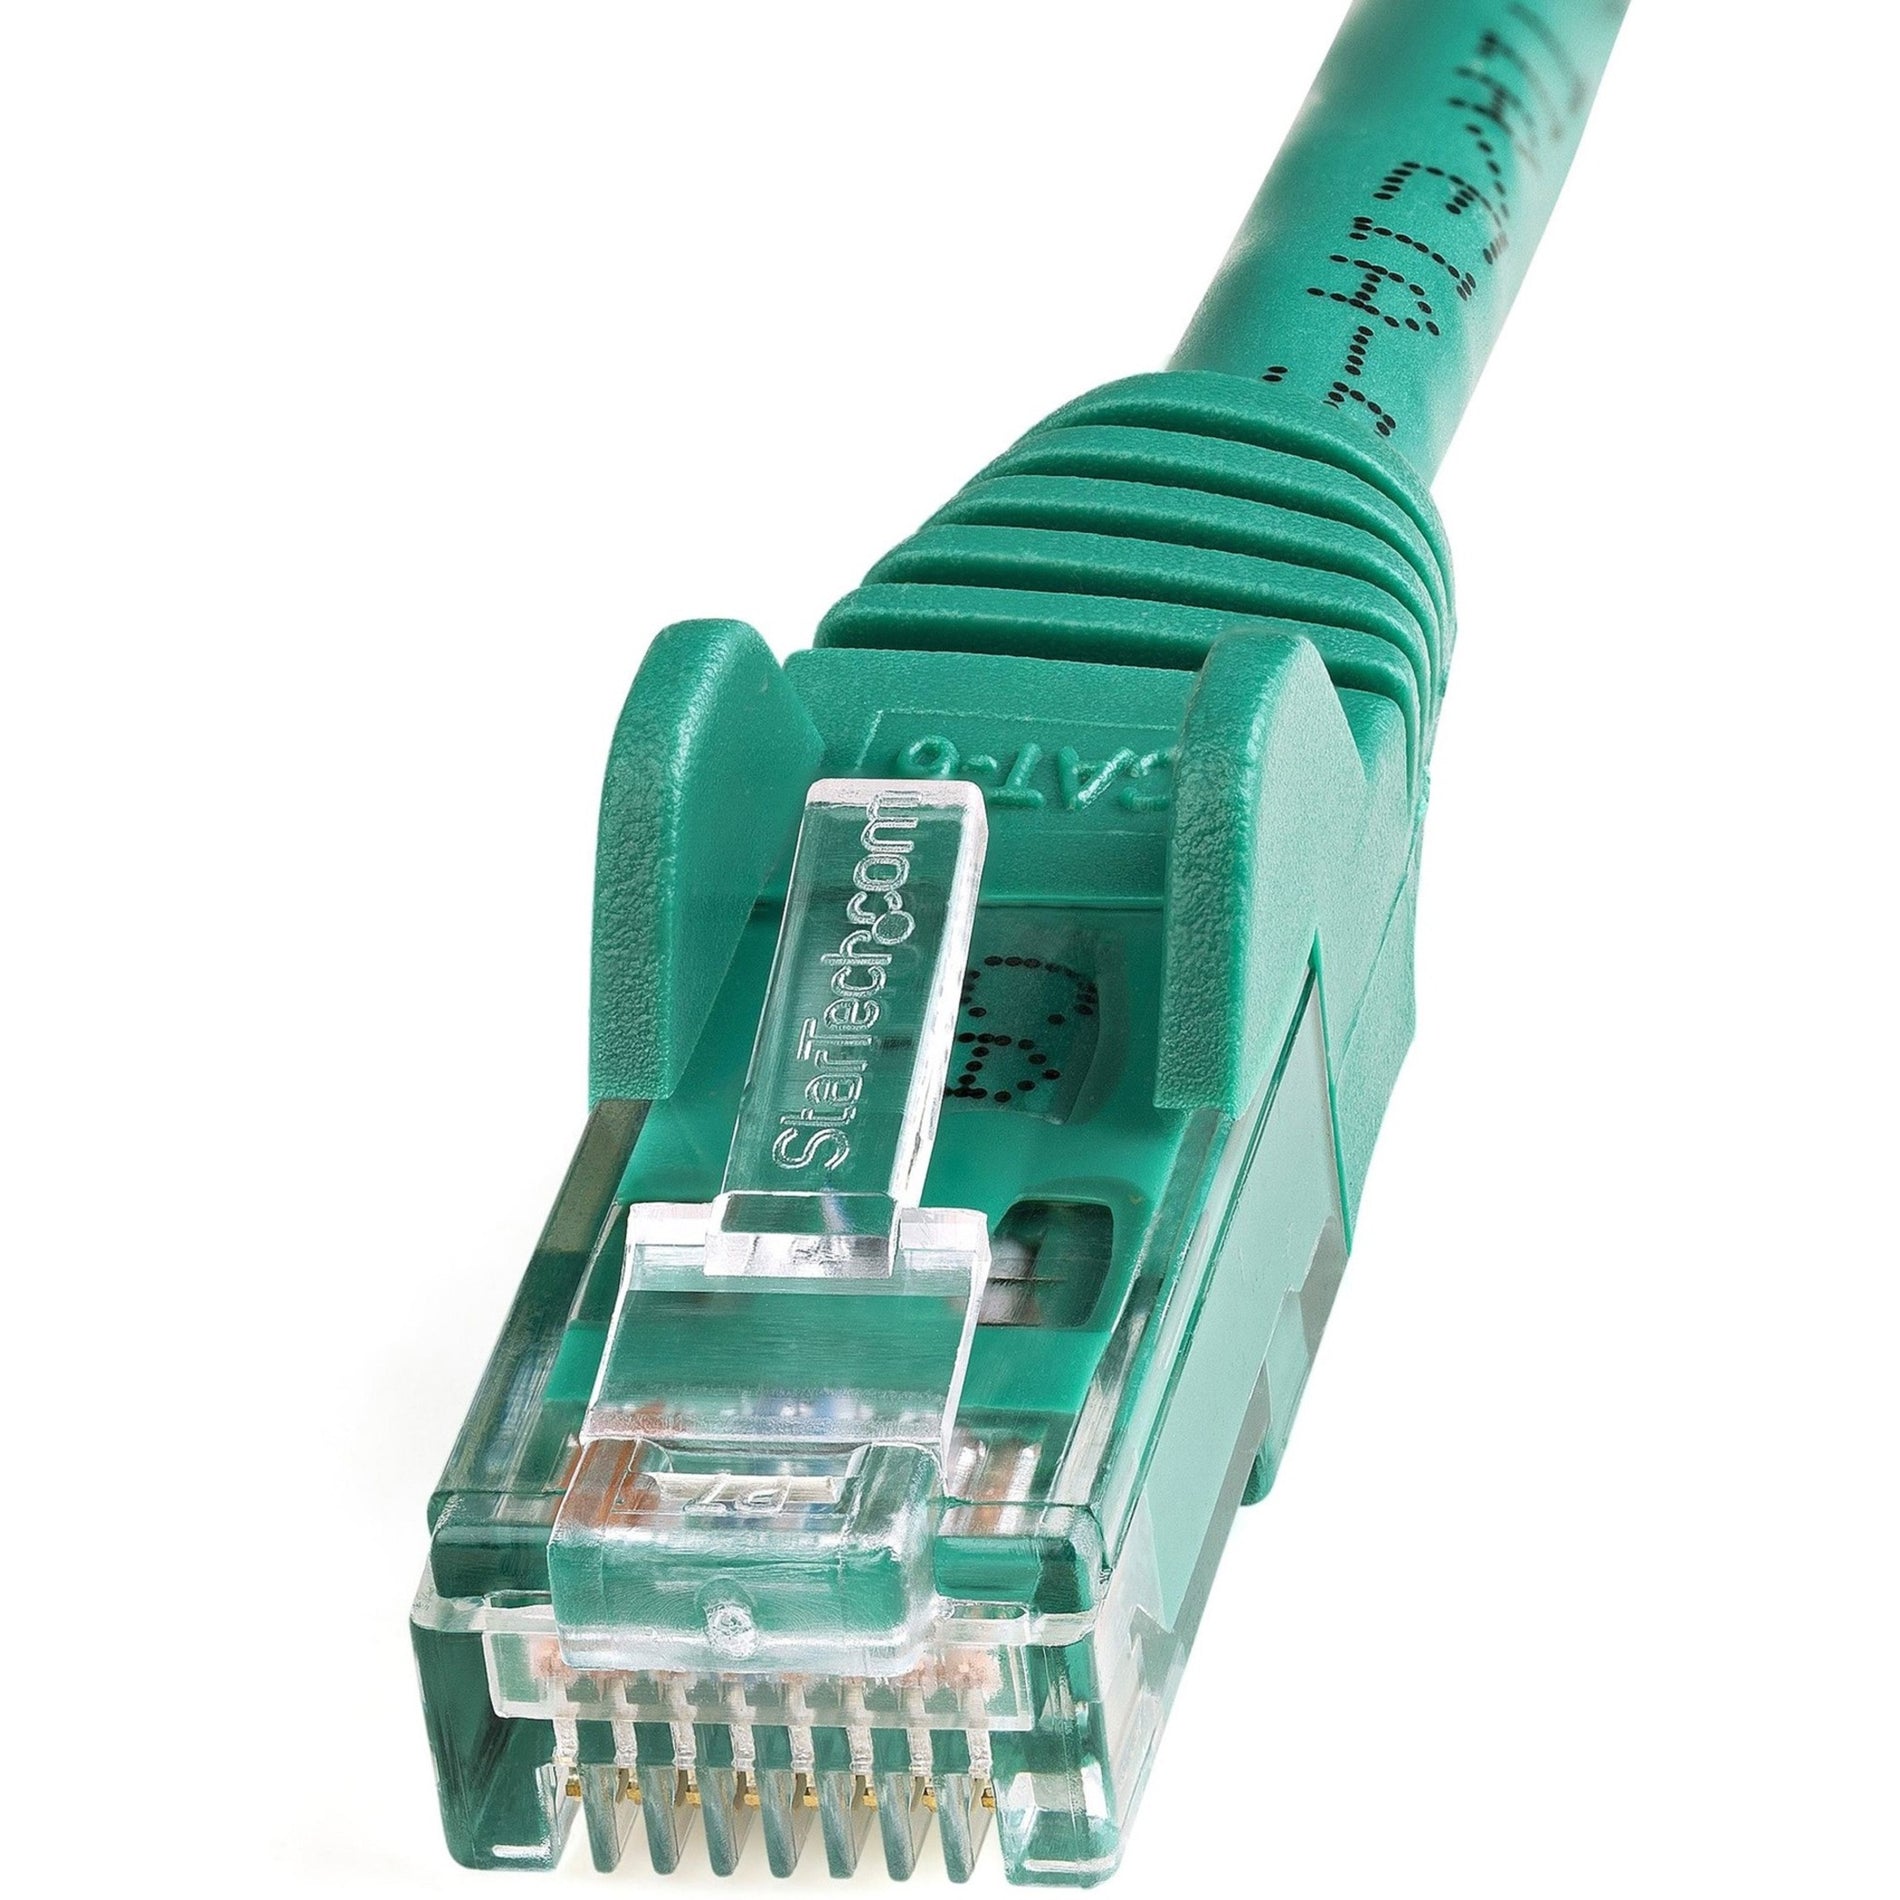 StarTech.com N6PATCH3GN 3 ft Green Snagless Cat6 UTP Patch Cable, Lifetime Warranty, 10 Gbit/s Data Transfer Rate